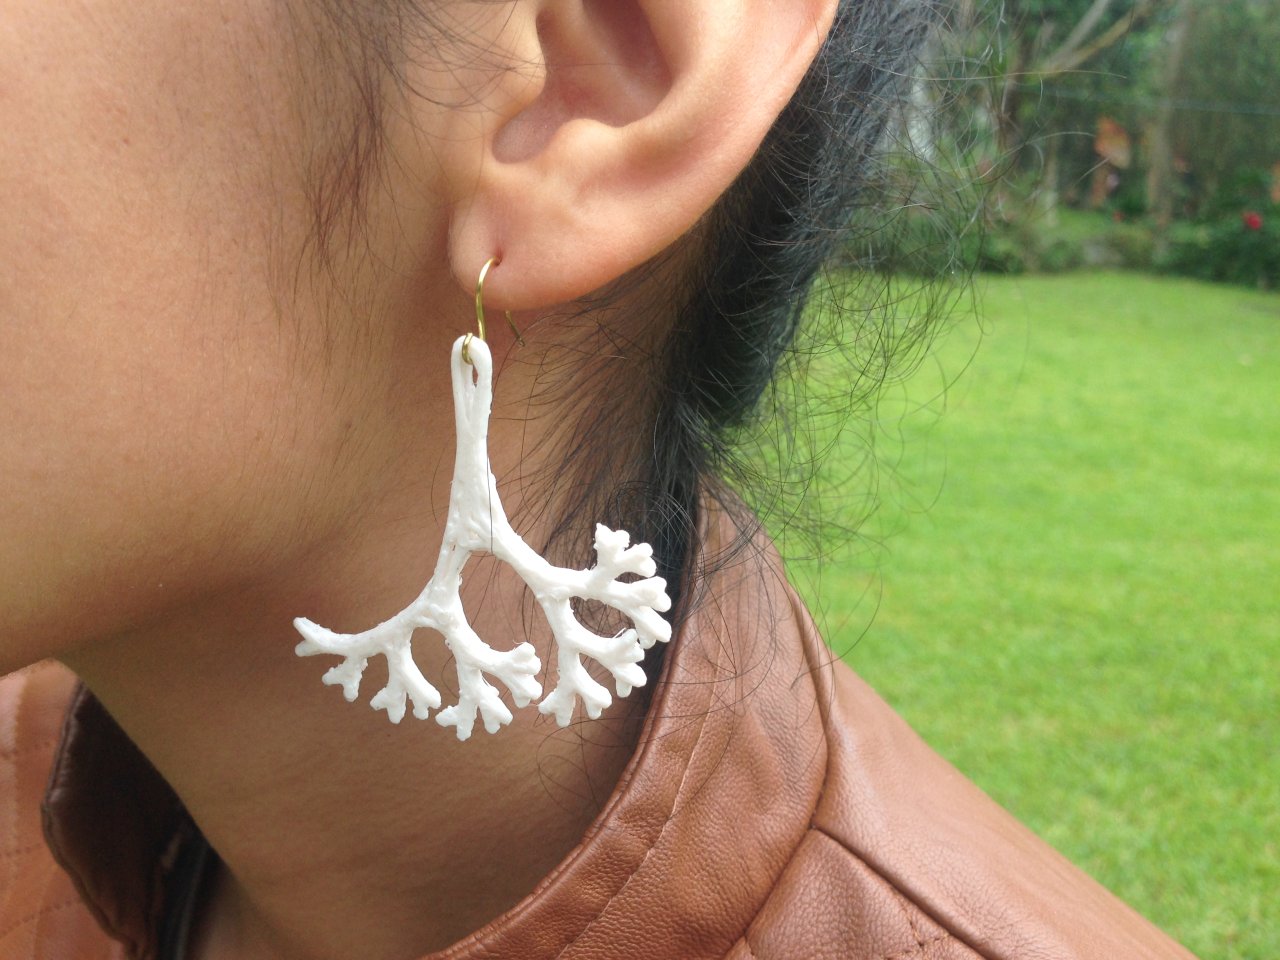 Melted Earring